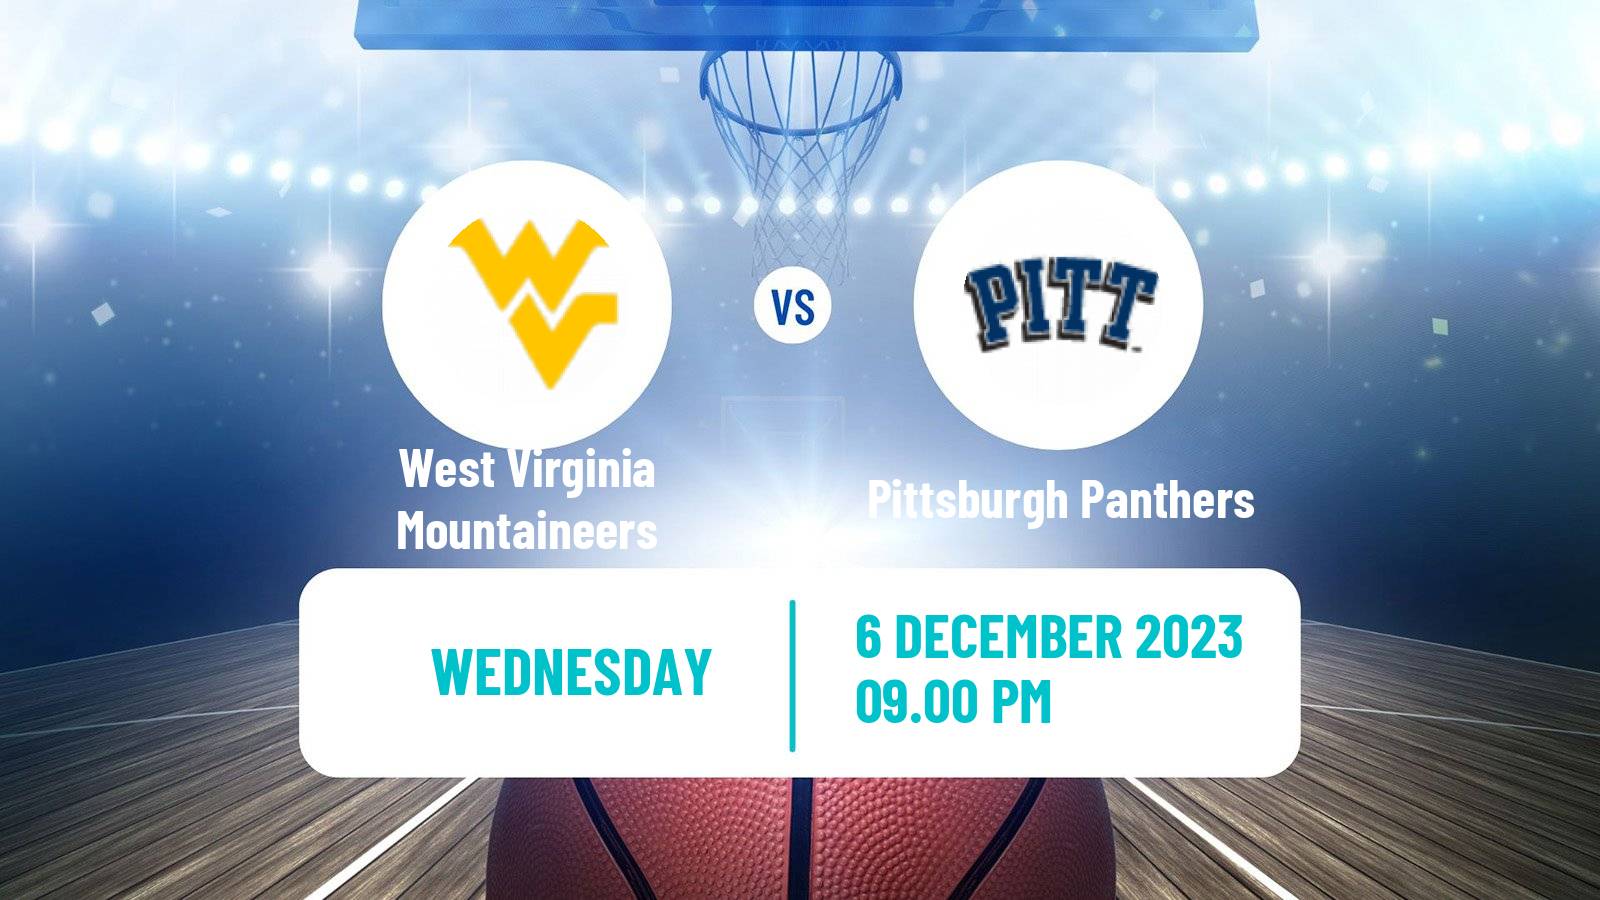 Basketball NCAA College Basketball West Virginia Mountaineers - Pittsburgh Panthers